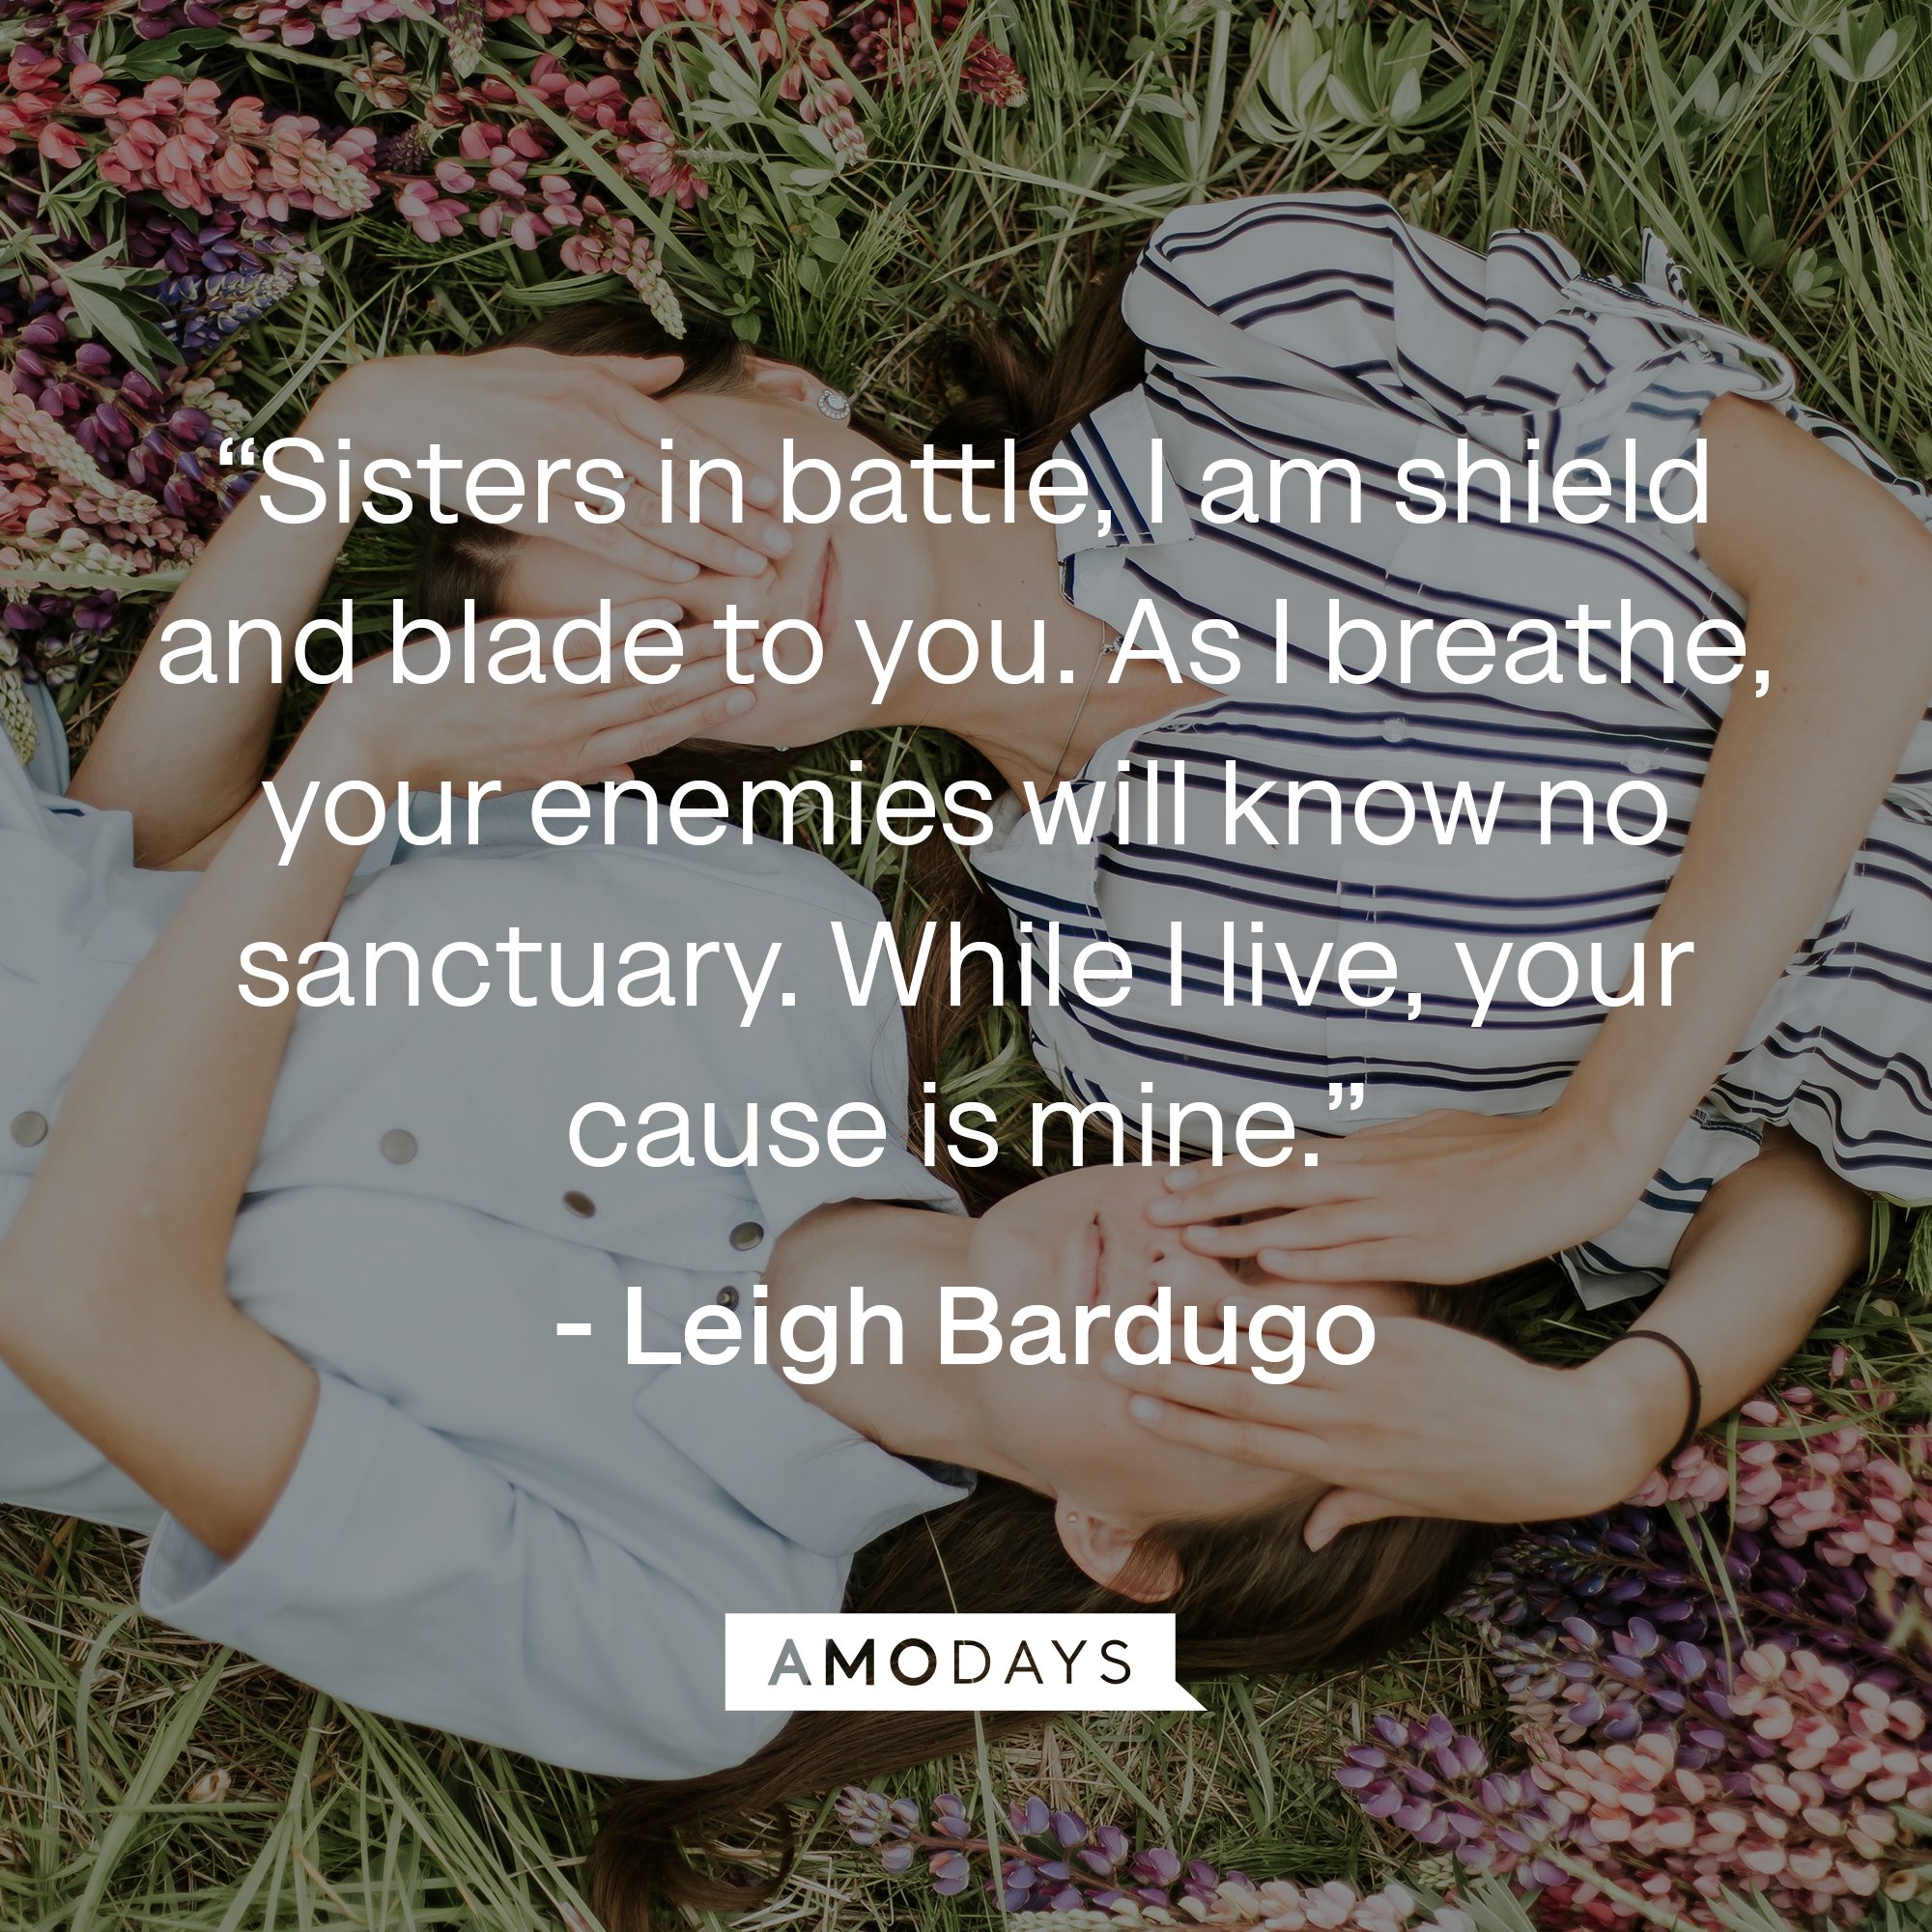  Leigh Bardugo's quote: "Sisters in battle, I am shield and blade to you. As I breathe, your enemies will know no sanctuary. While I live, your cause is mine." | Image: AmoDays